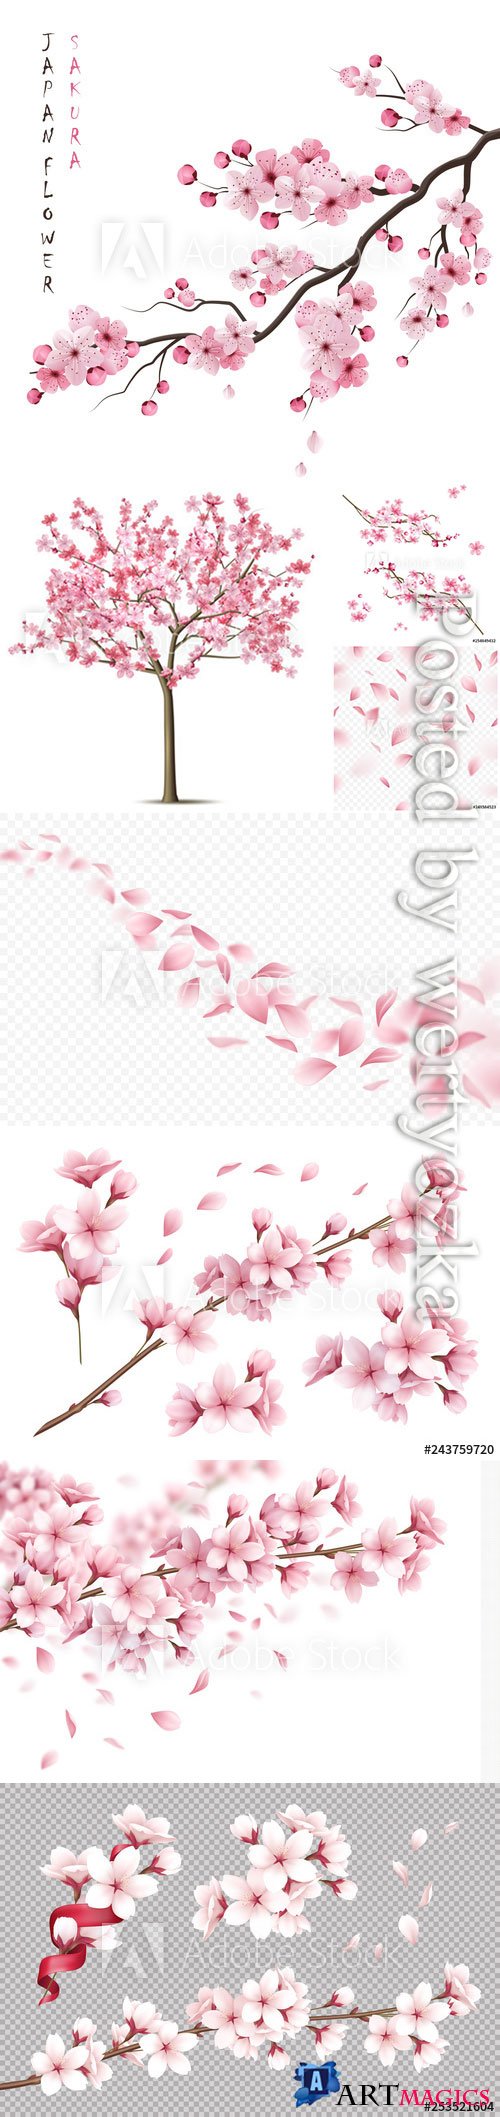 Cherry flowers background vector illustrations